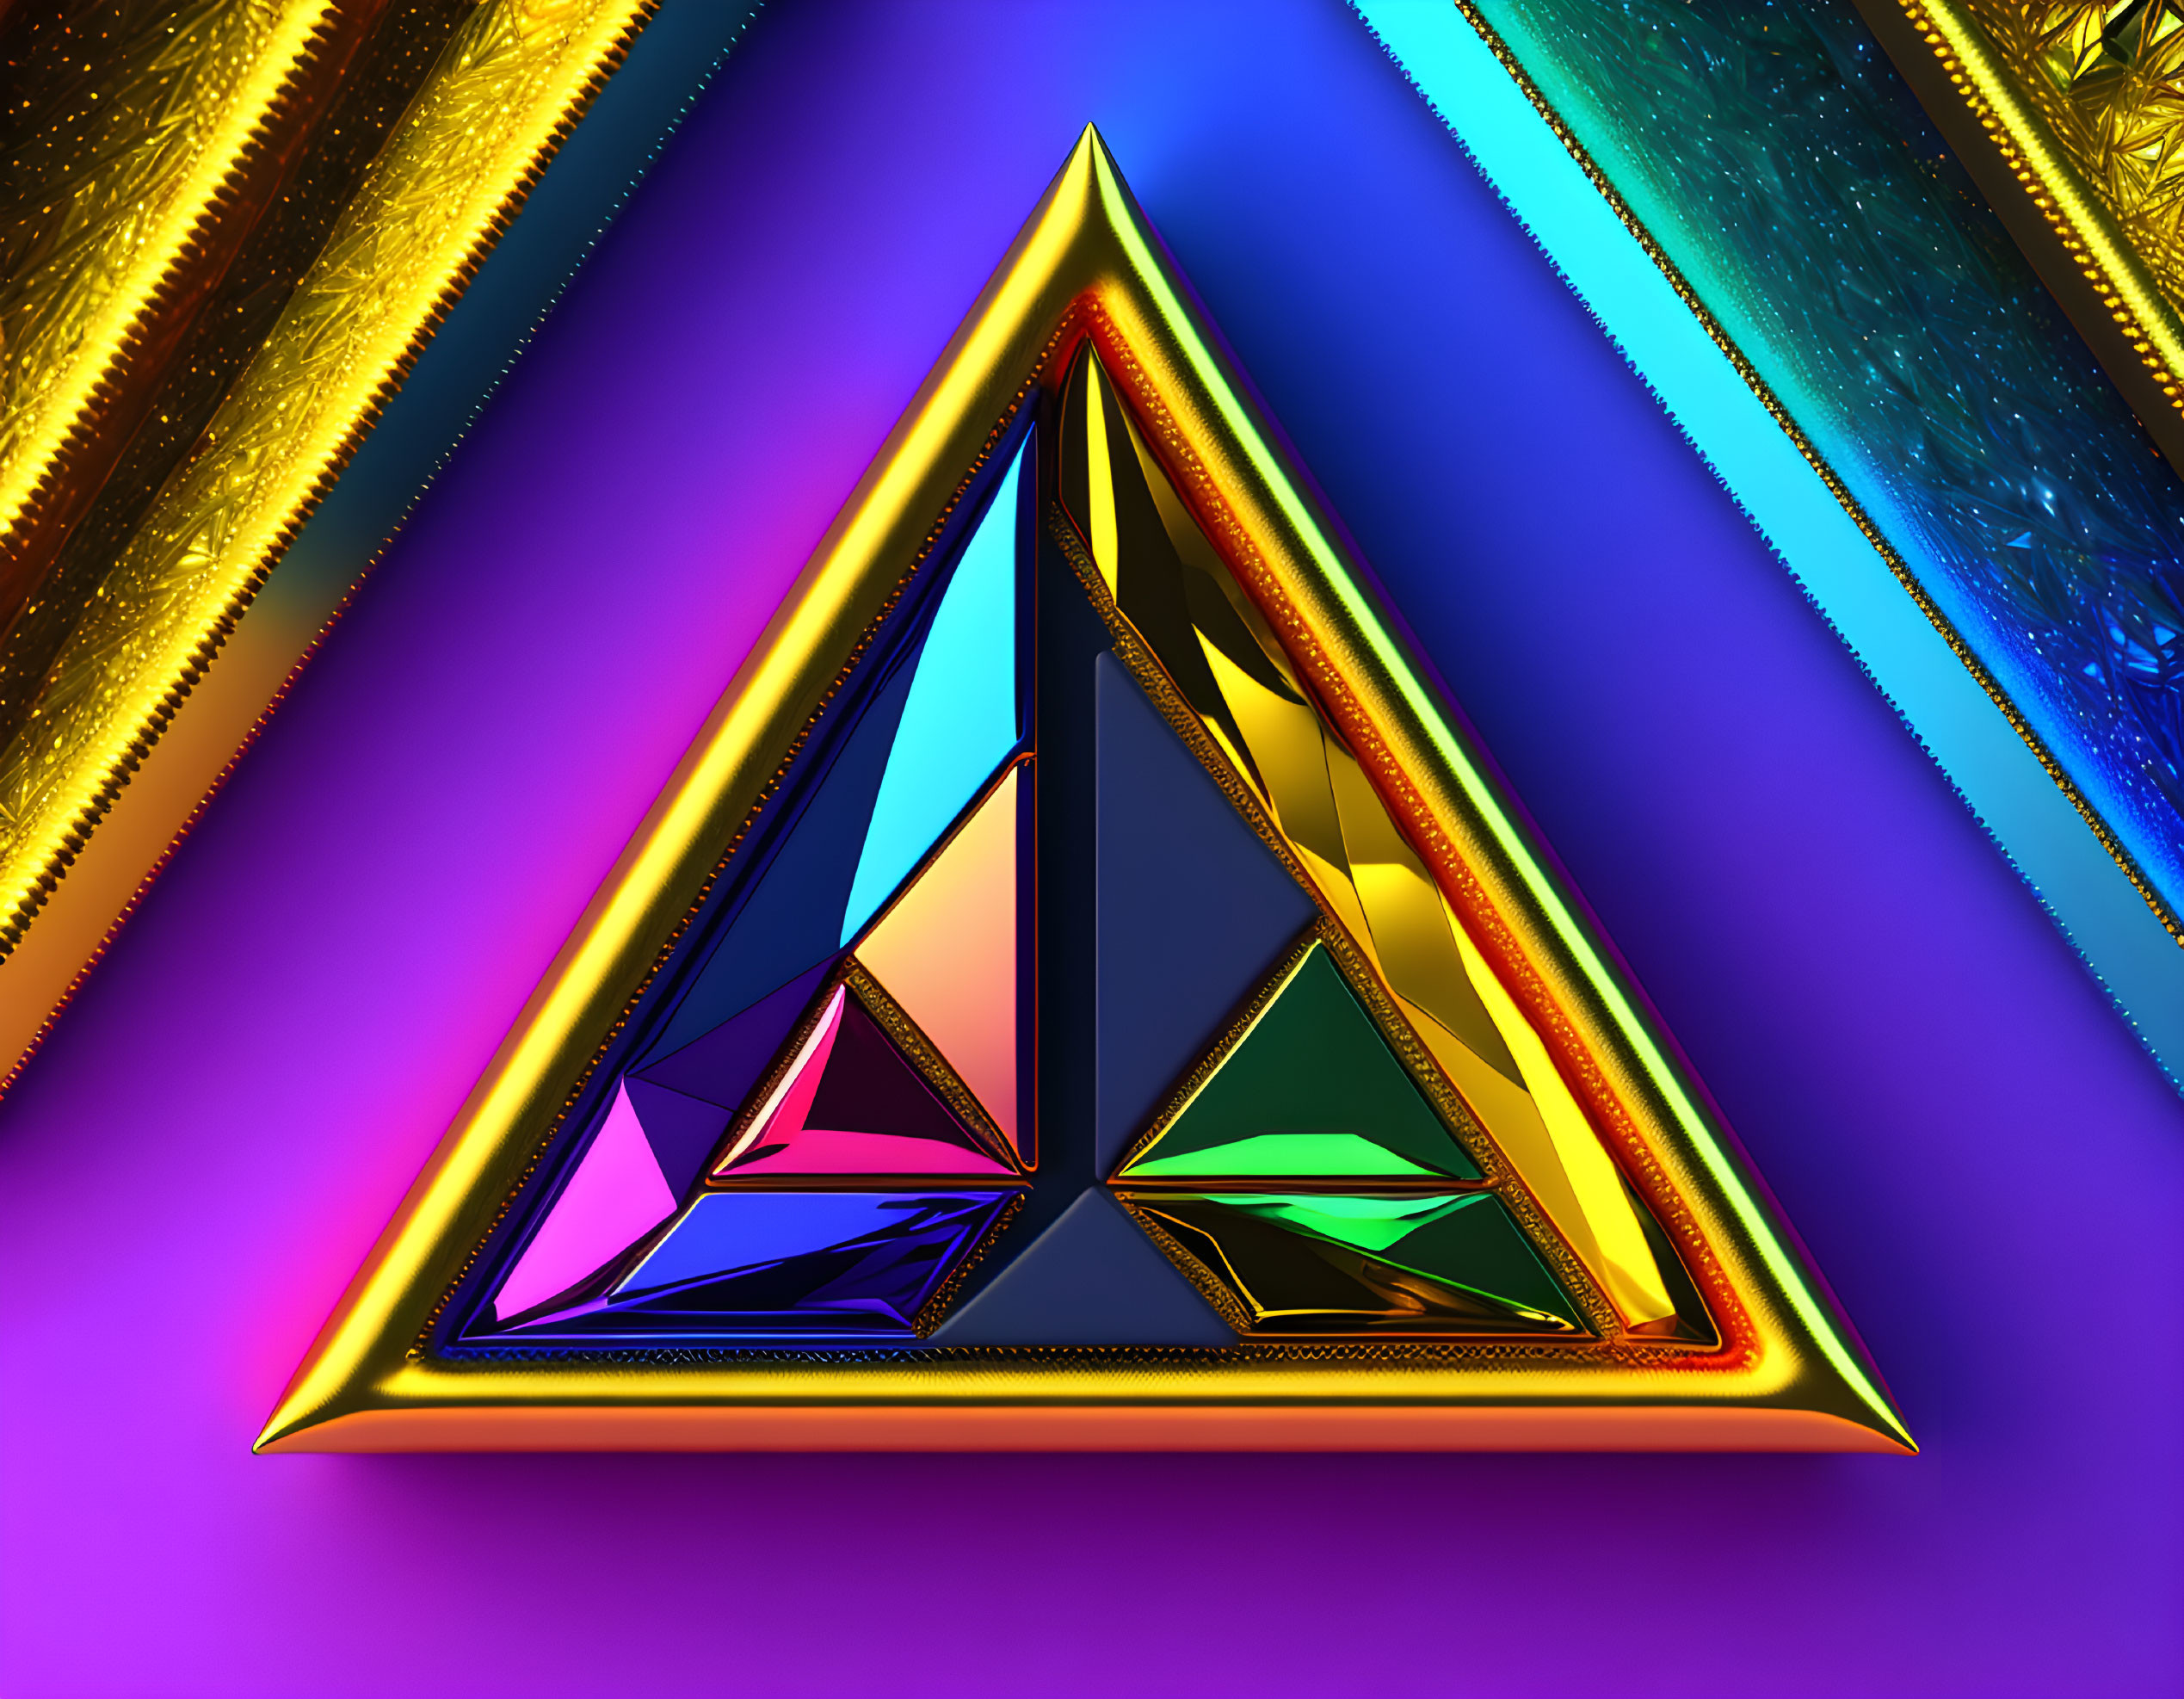 Colorful 3D triangular fractal art with gold accents on purple background